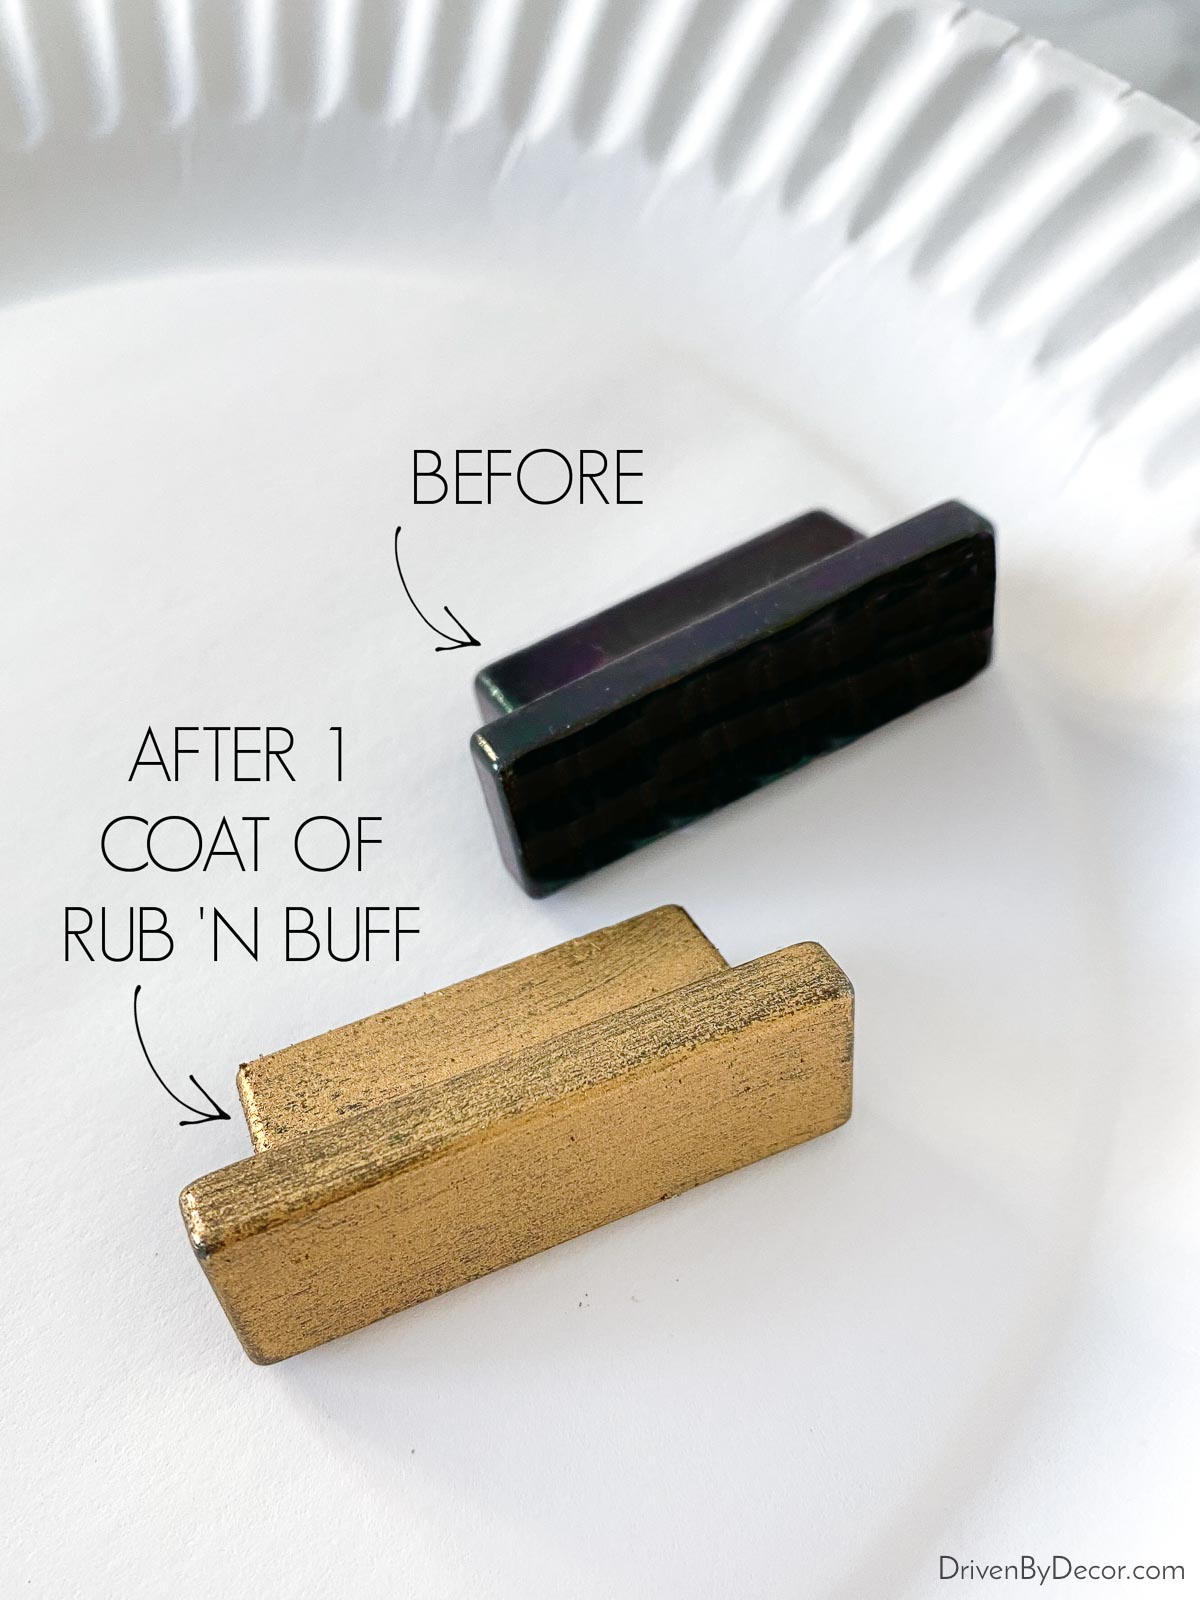 5 Ways to Use Rub 'n Buff in Your Home, H. Prall